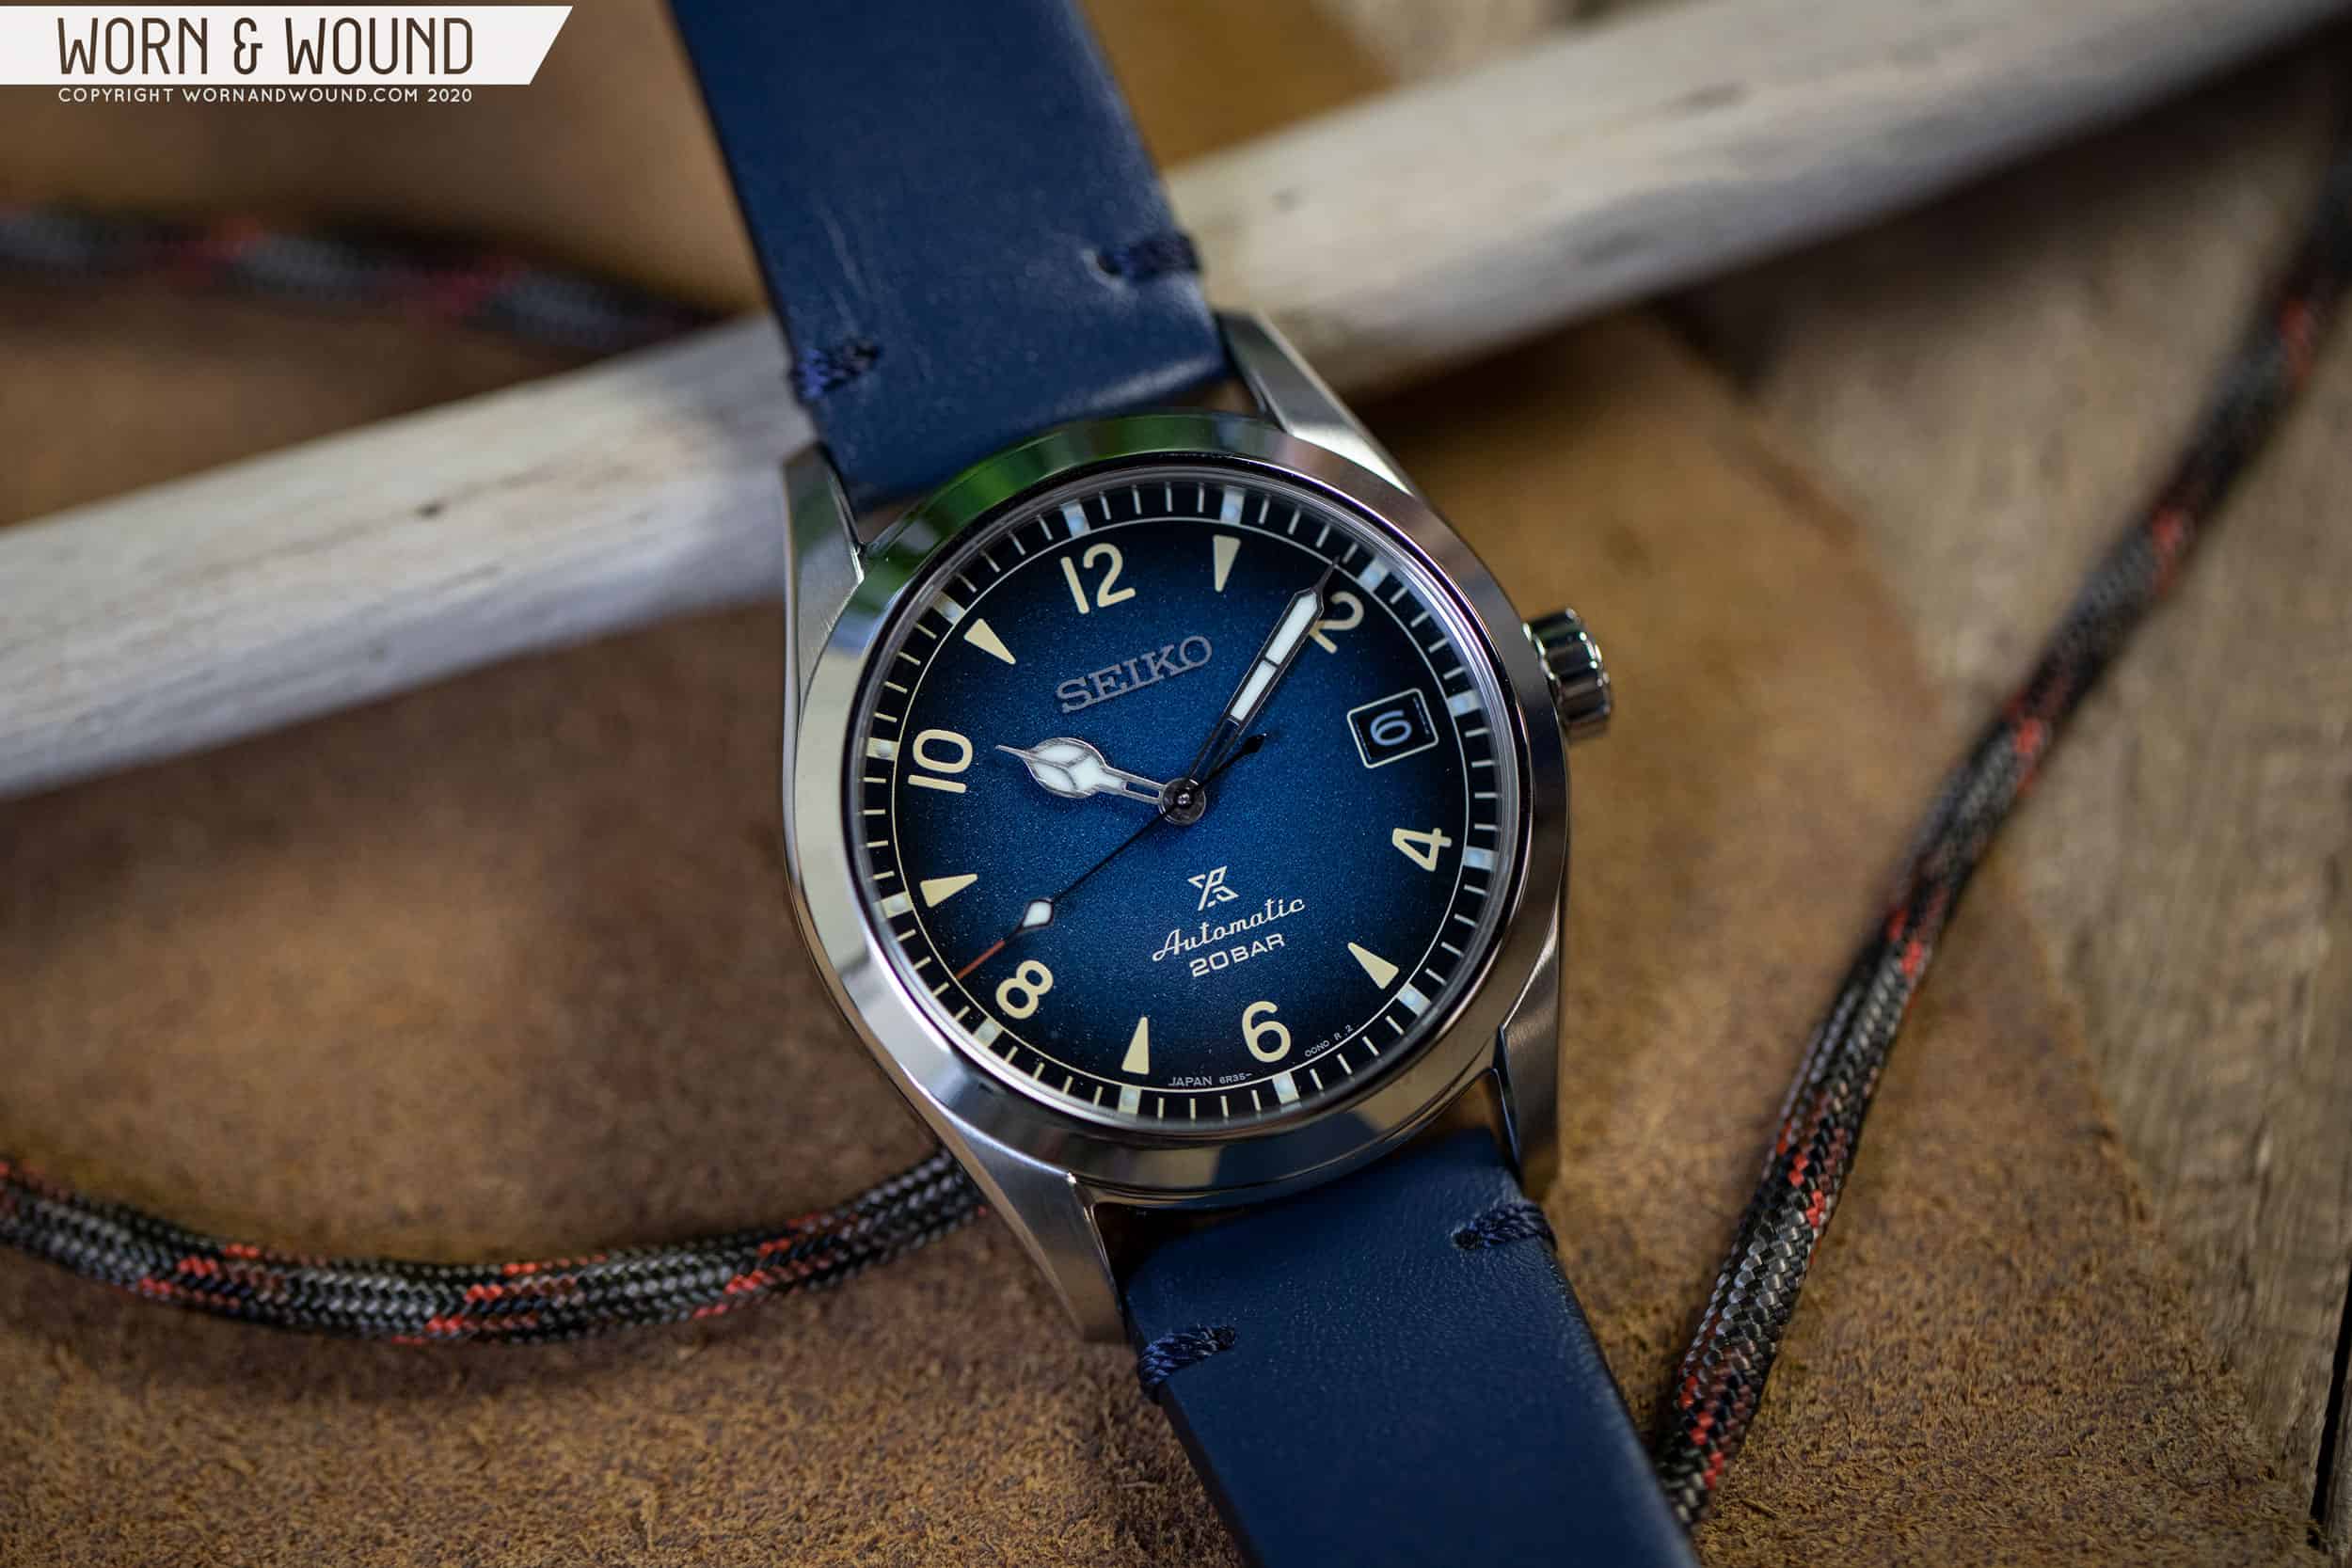 First Look: Seiko Expands Their Alpinist Line With A New, Smaller Model  Worn Wound 